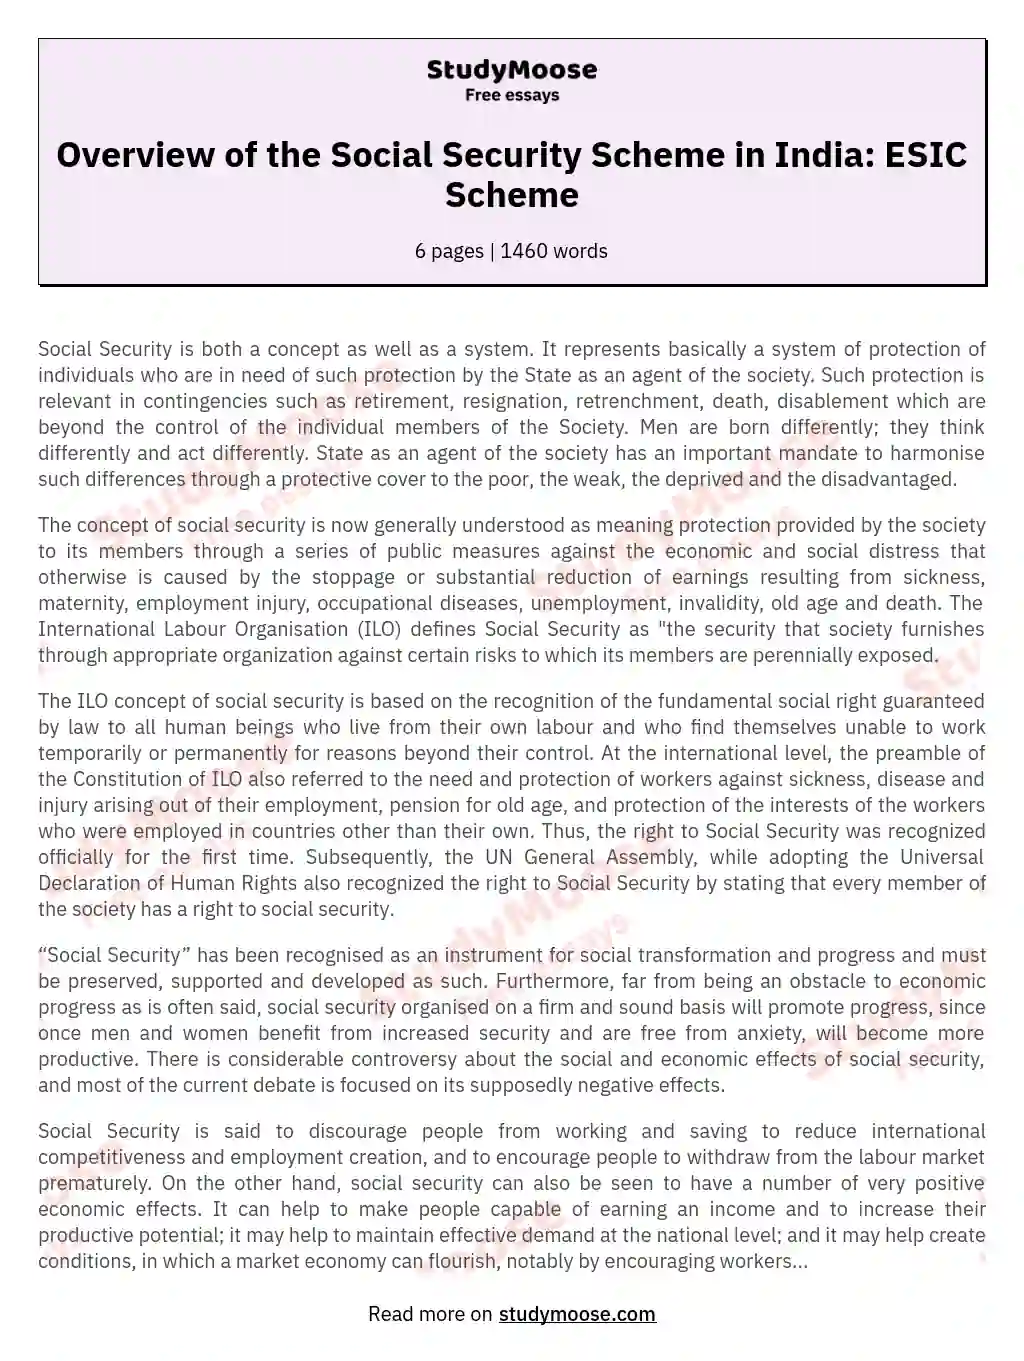 Overview of the Social Security Scheme in India: ESIC Scheme